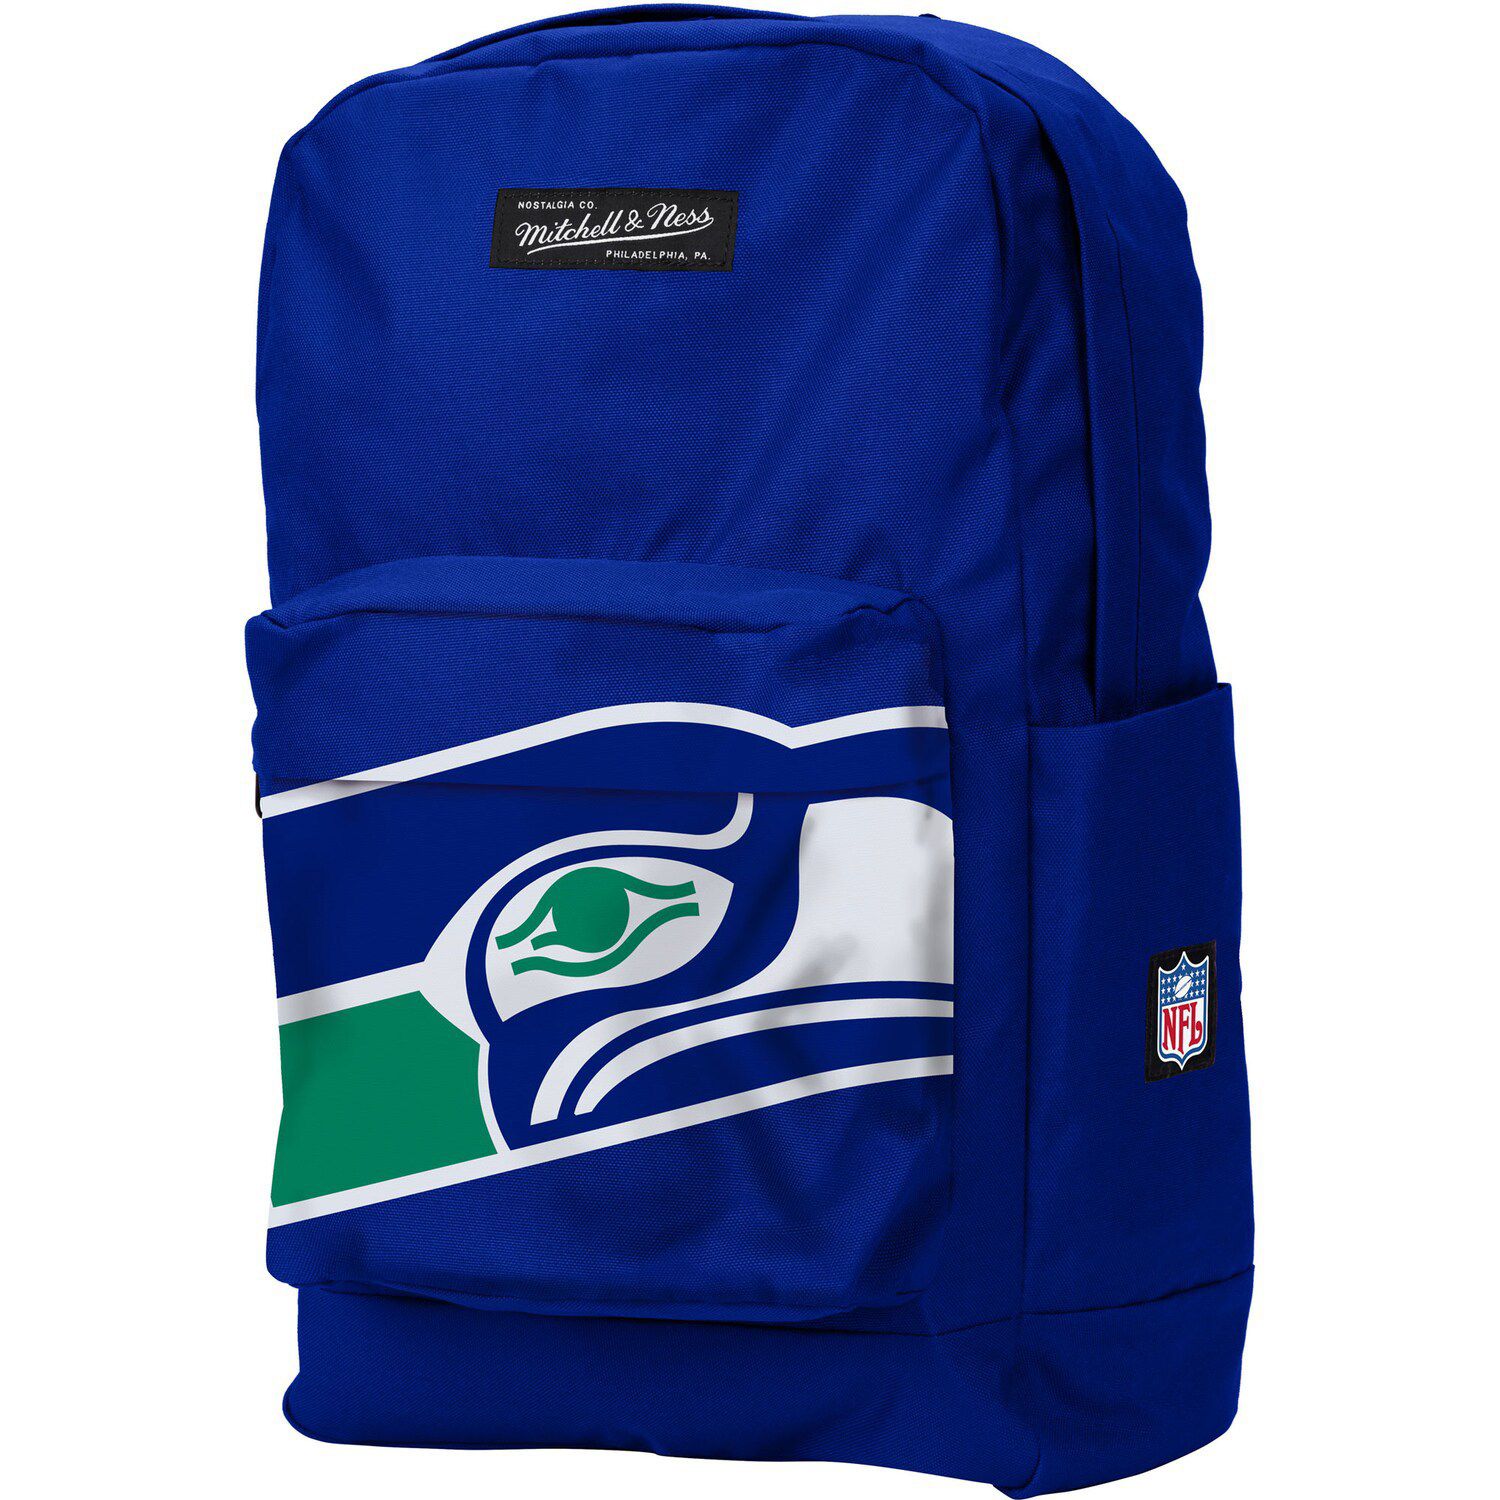 Image for Unbranded Mitchell & Ness Seattle Seahawks Backpack at Kohl's.